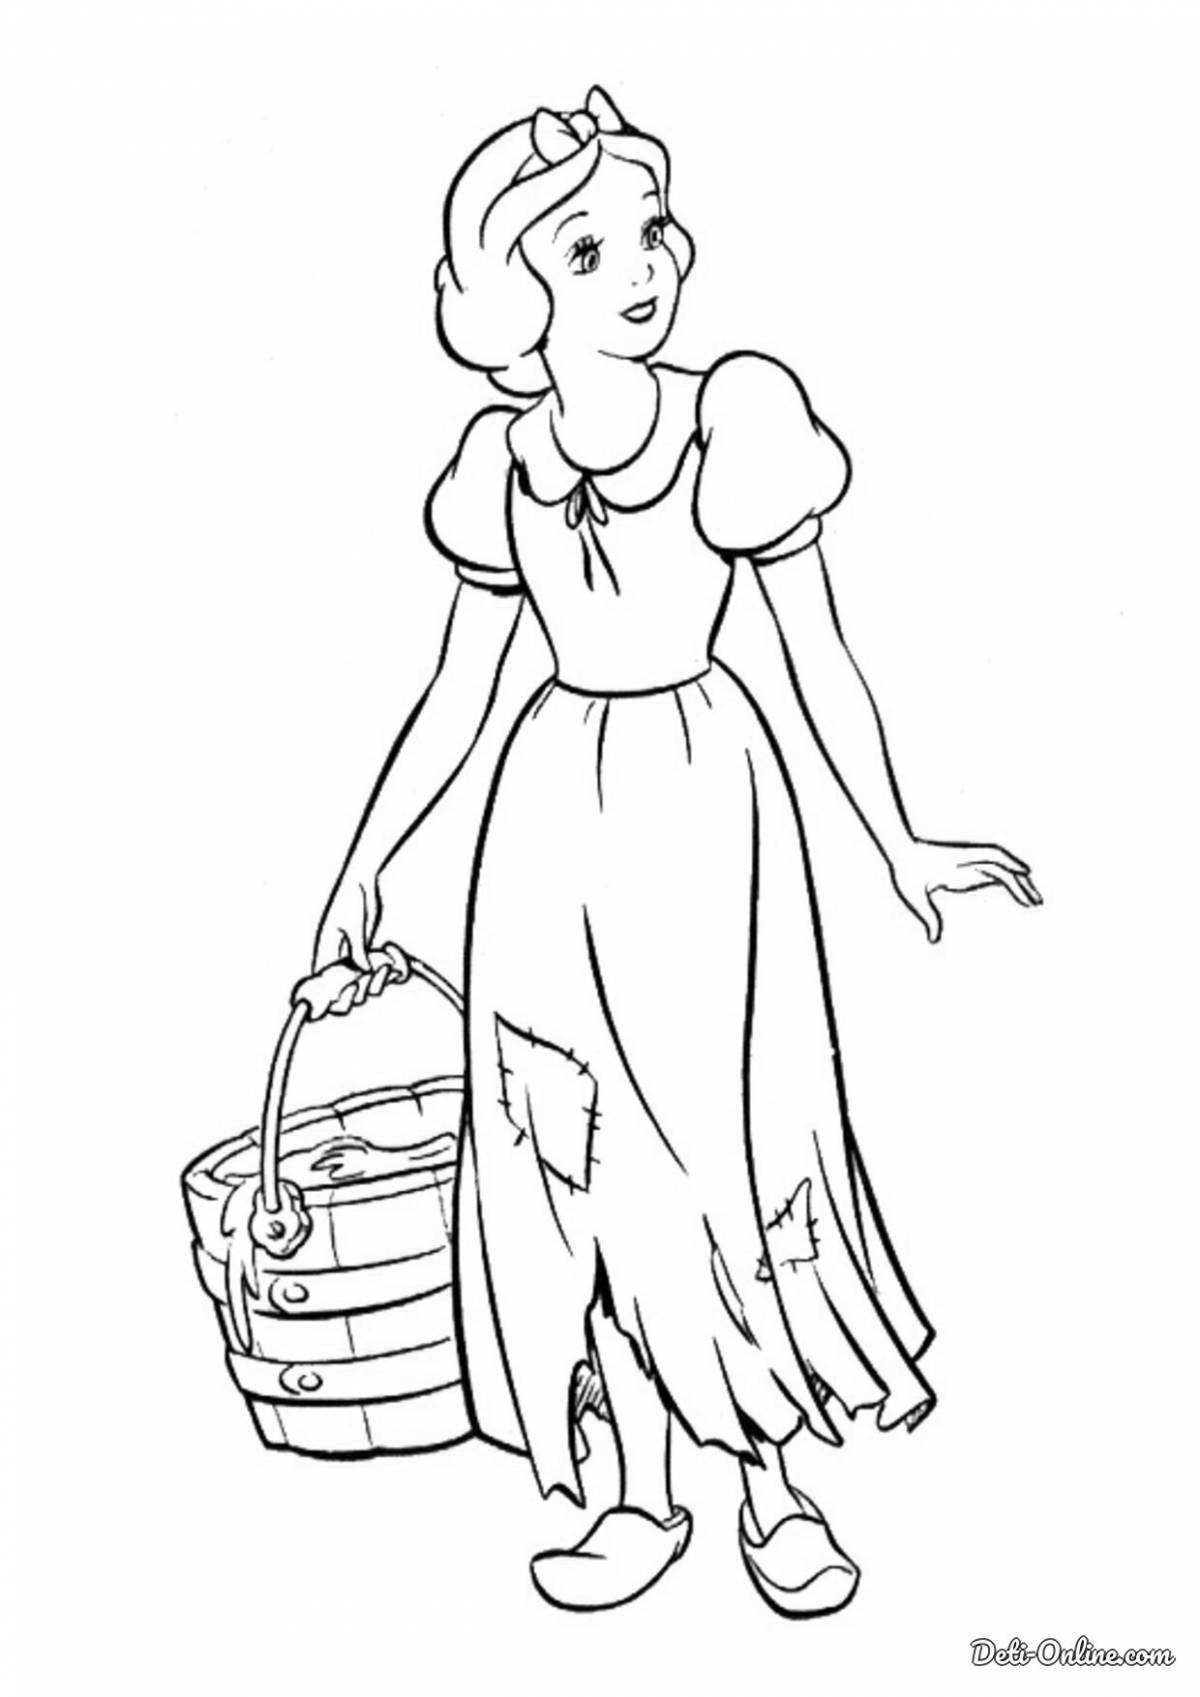 Delightful snow white coloring book for girls